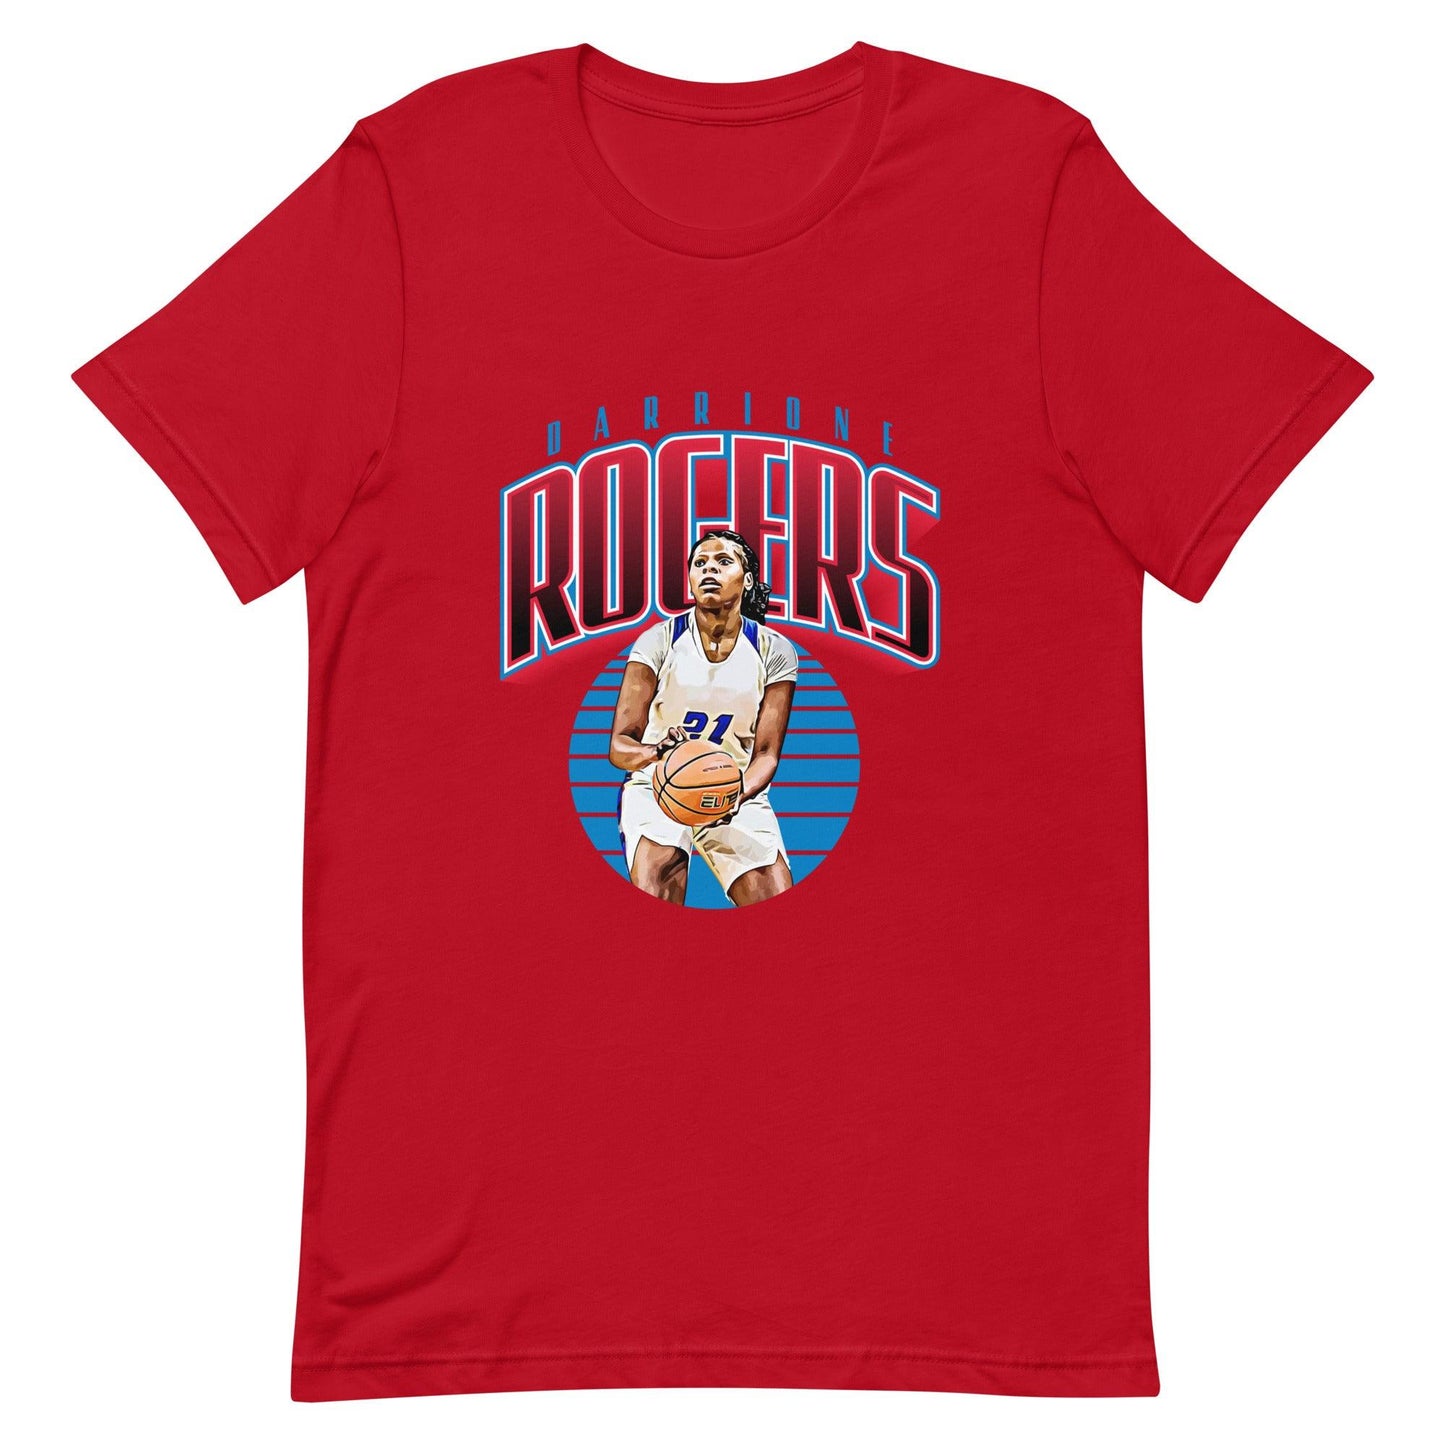 Darrione Rogers "Gameday" t-shirt - Fan Arch